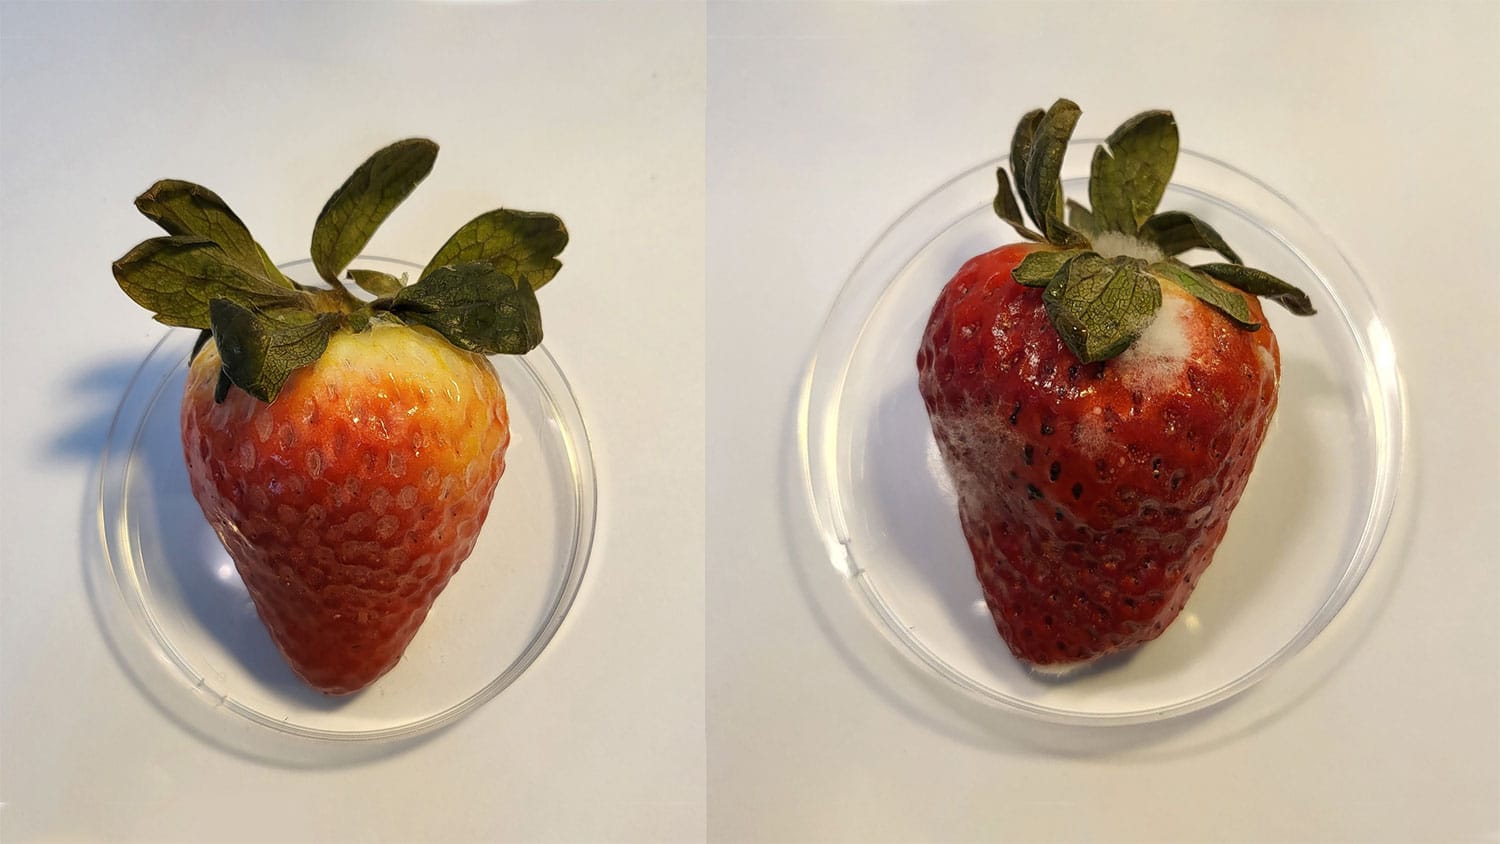 A strawberry enveloped in an edible CBD coating (left) still appeared fresh compared to an untreated berry (right) after 15 days.